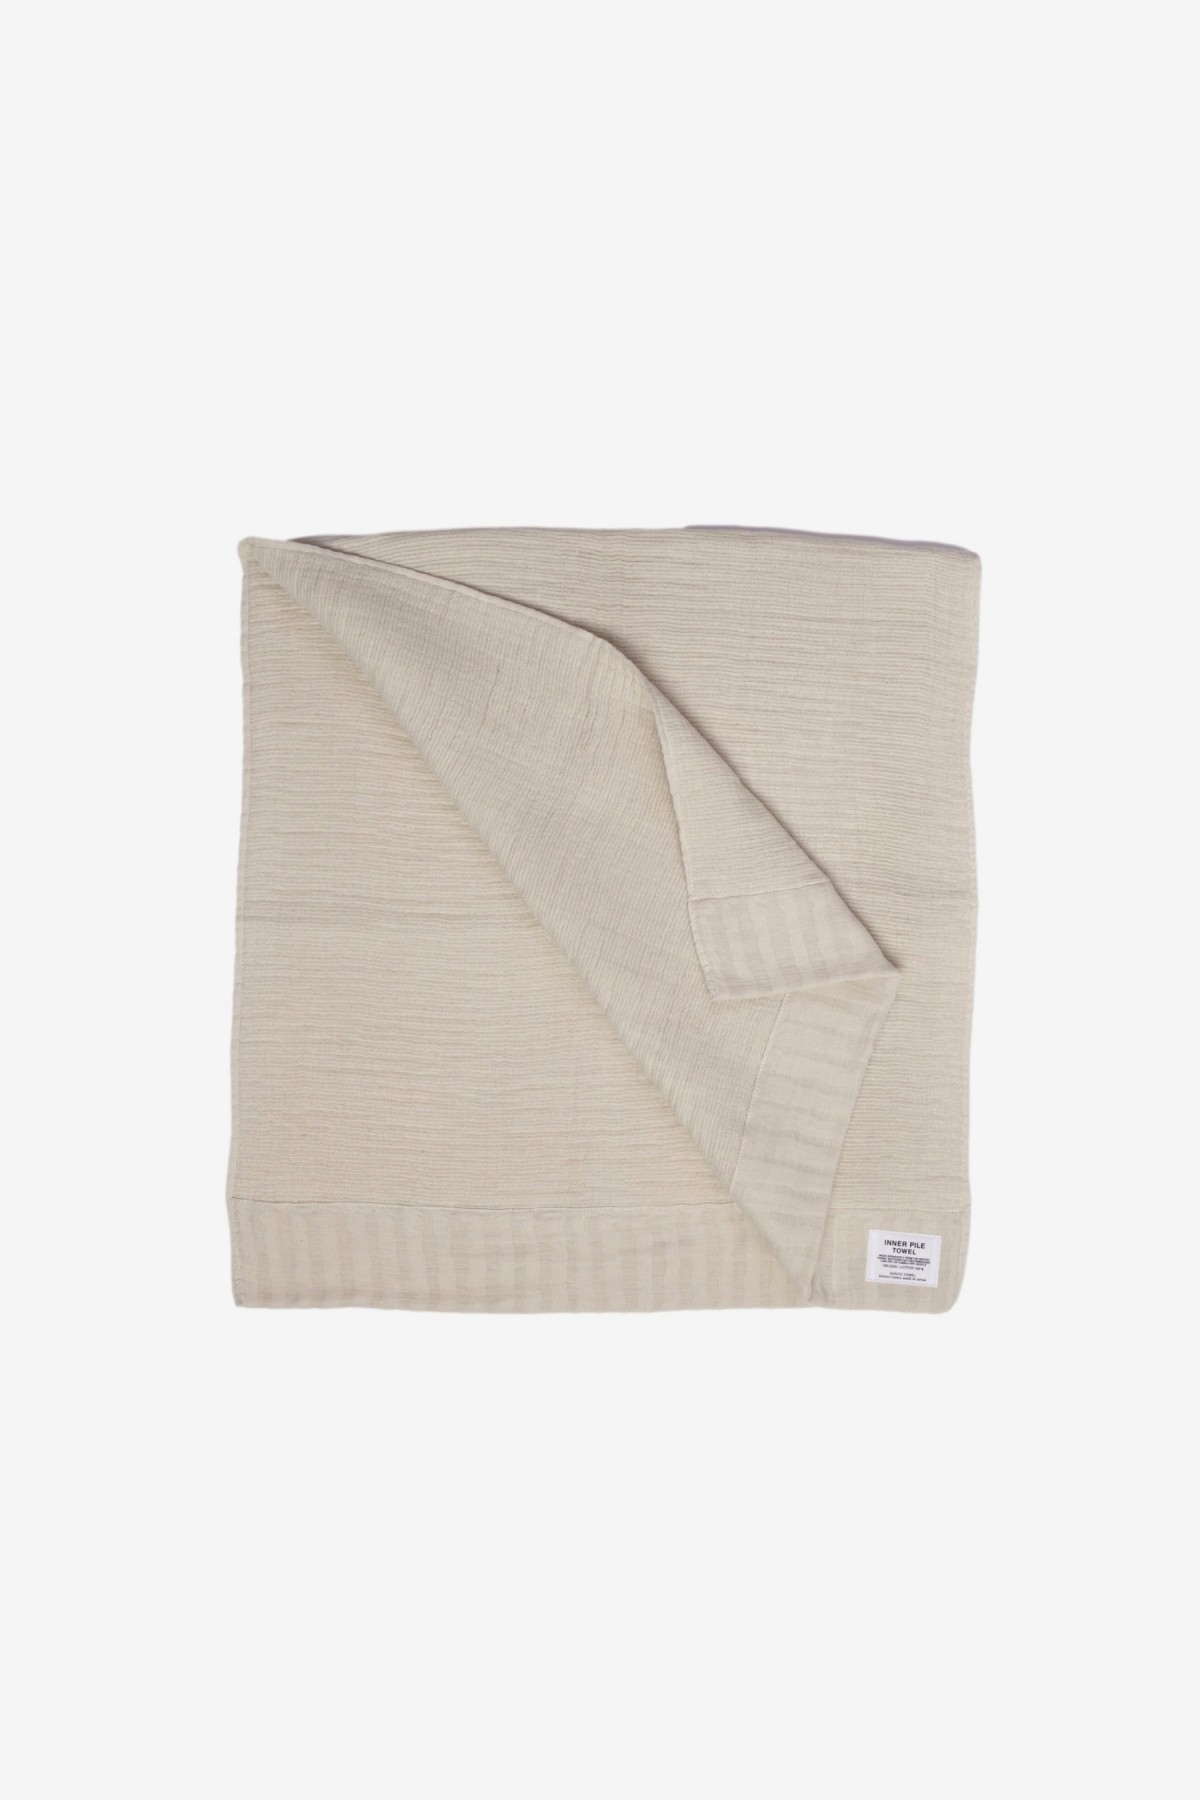 Shinto Inner Pile Bath Towel in Ivory